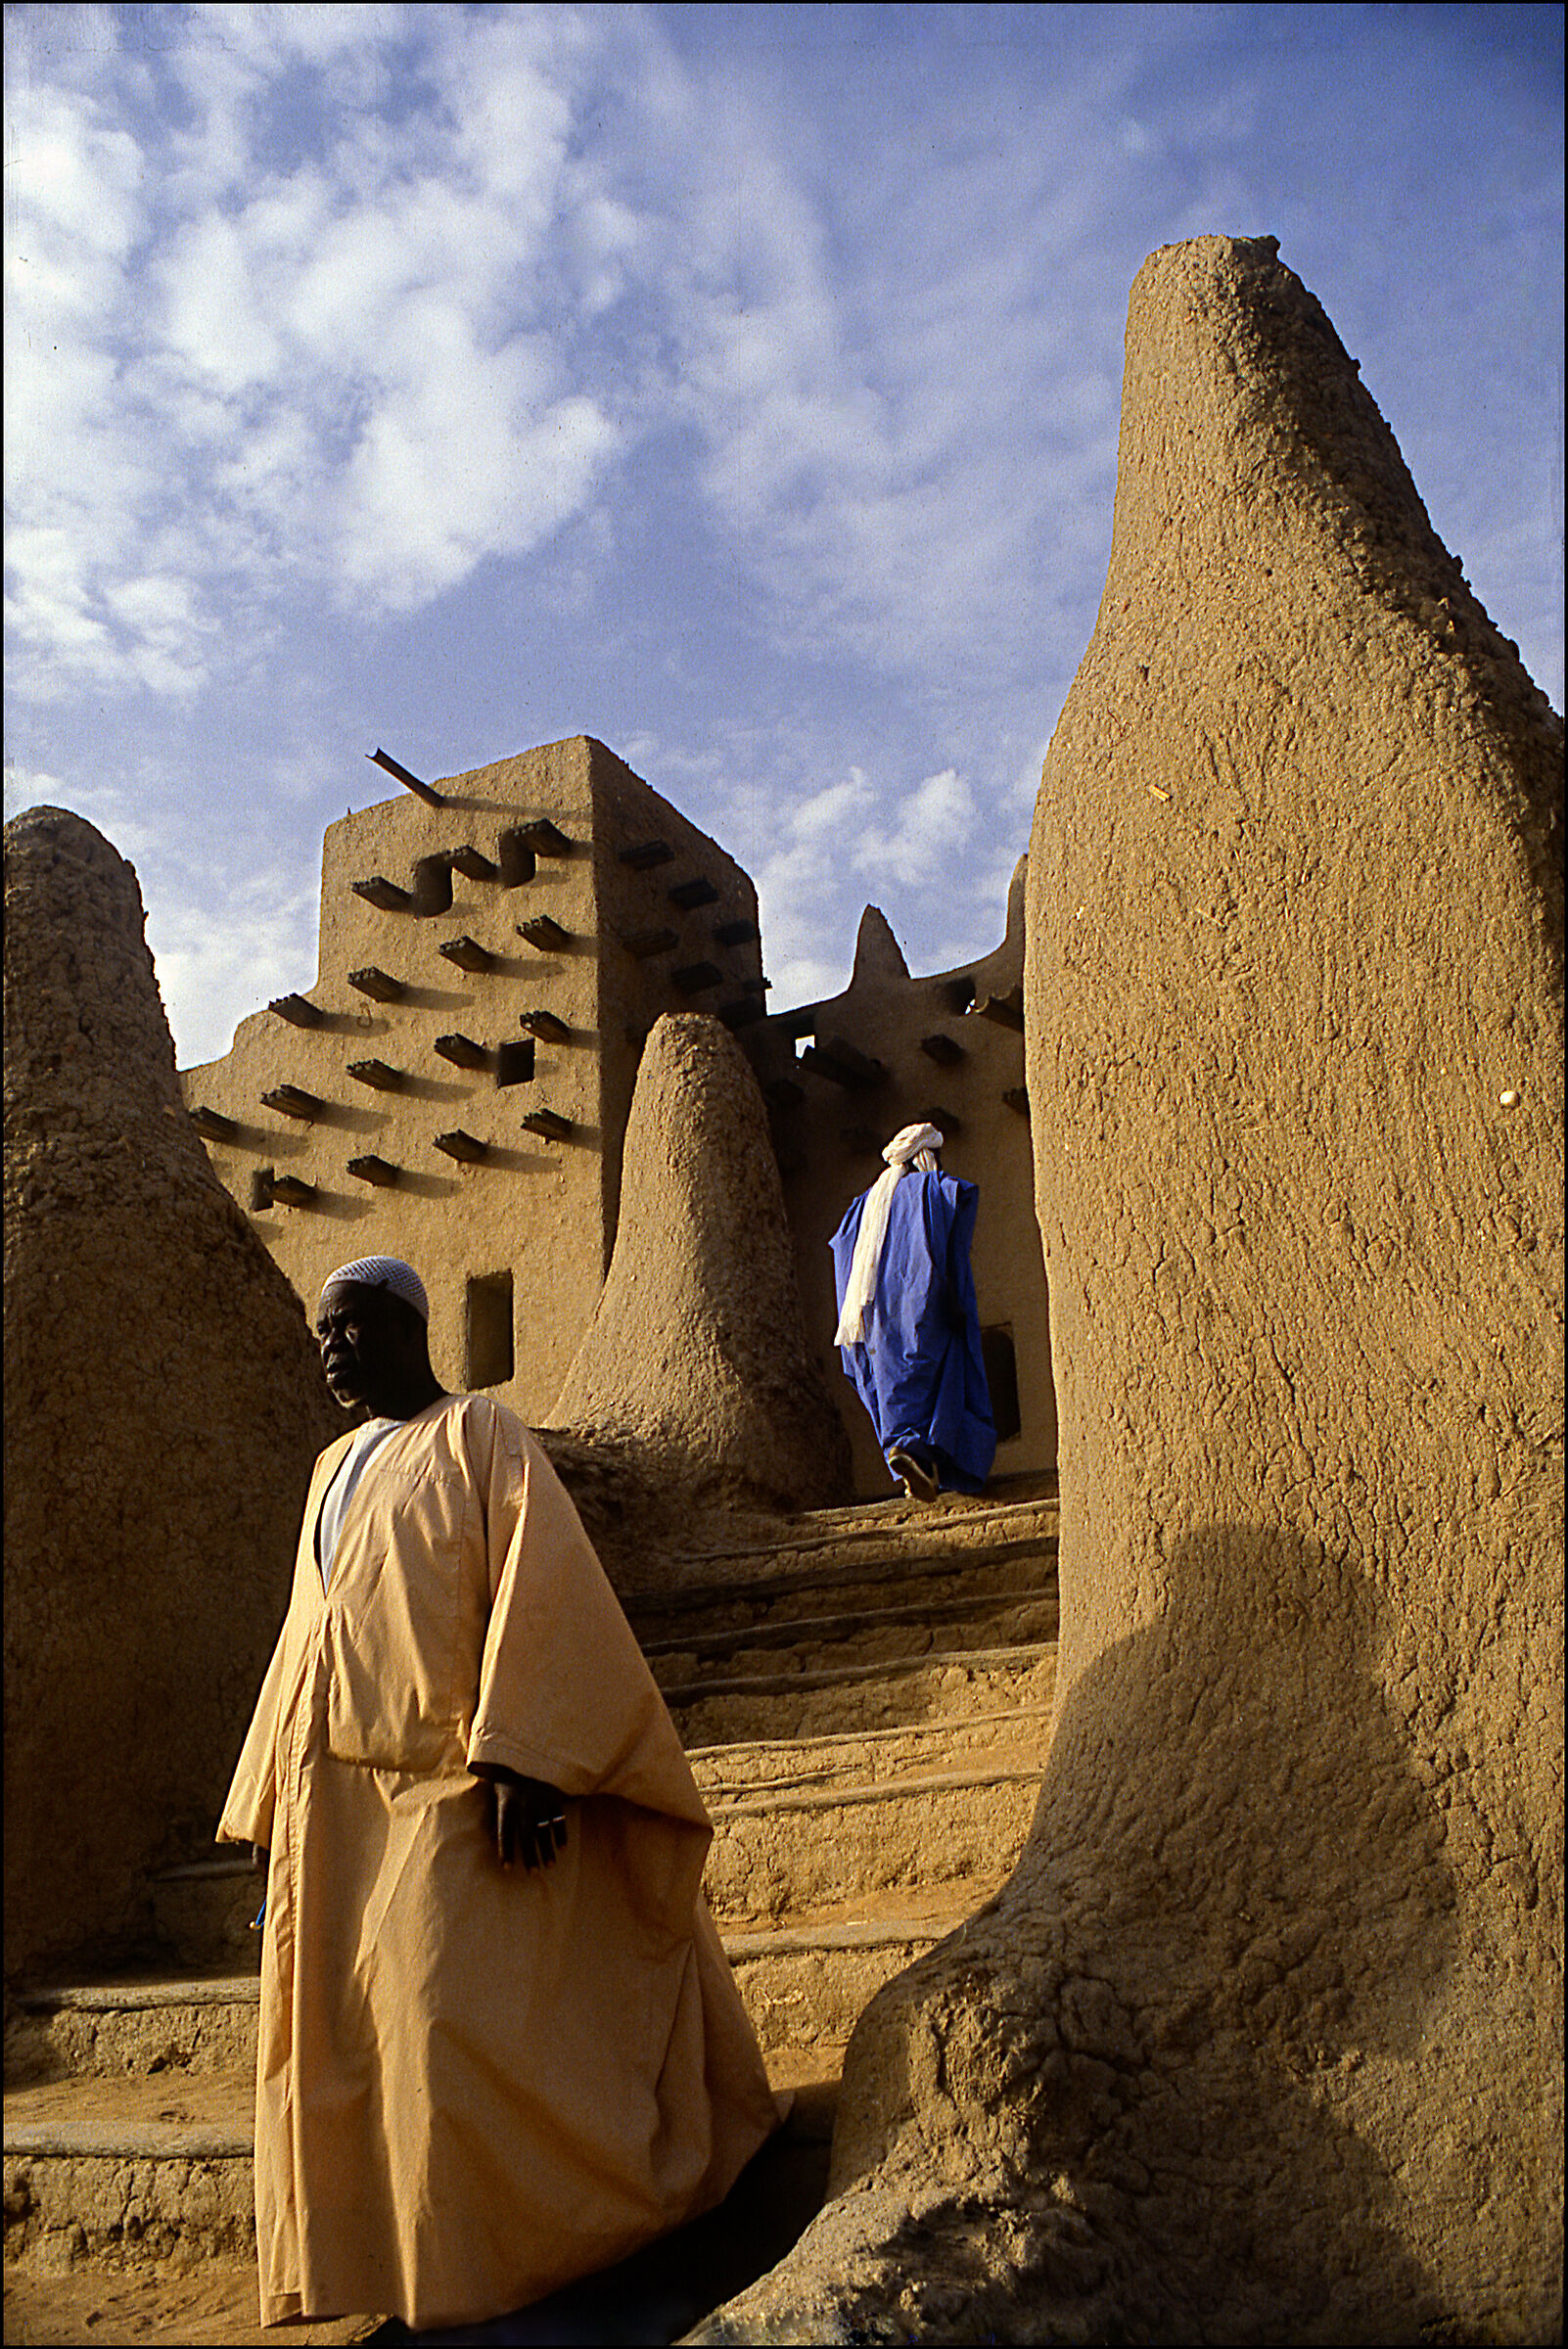 1985 Mali Djenne "at the mosque"...